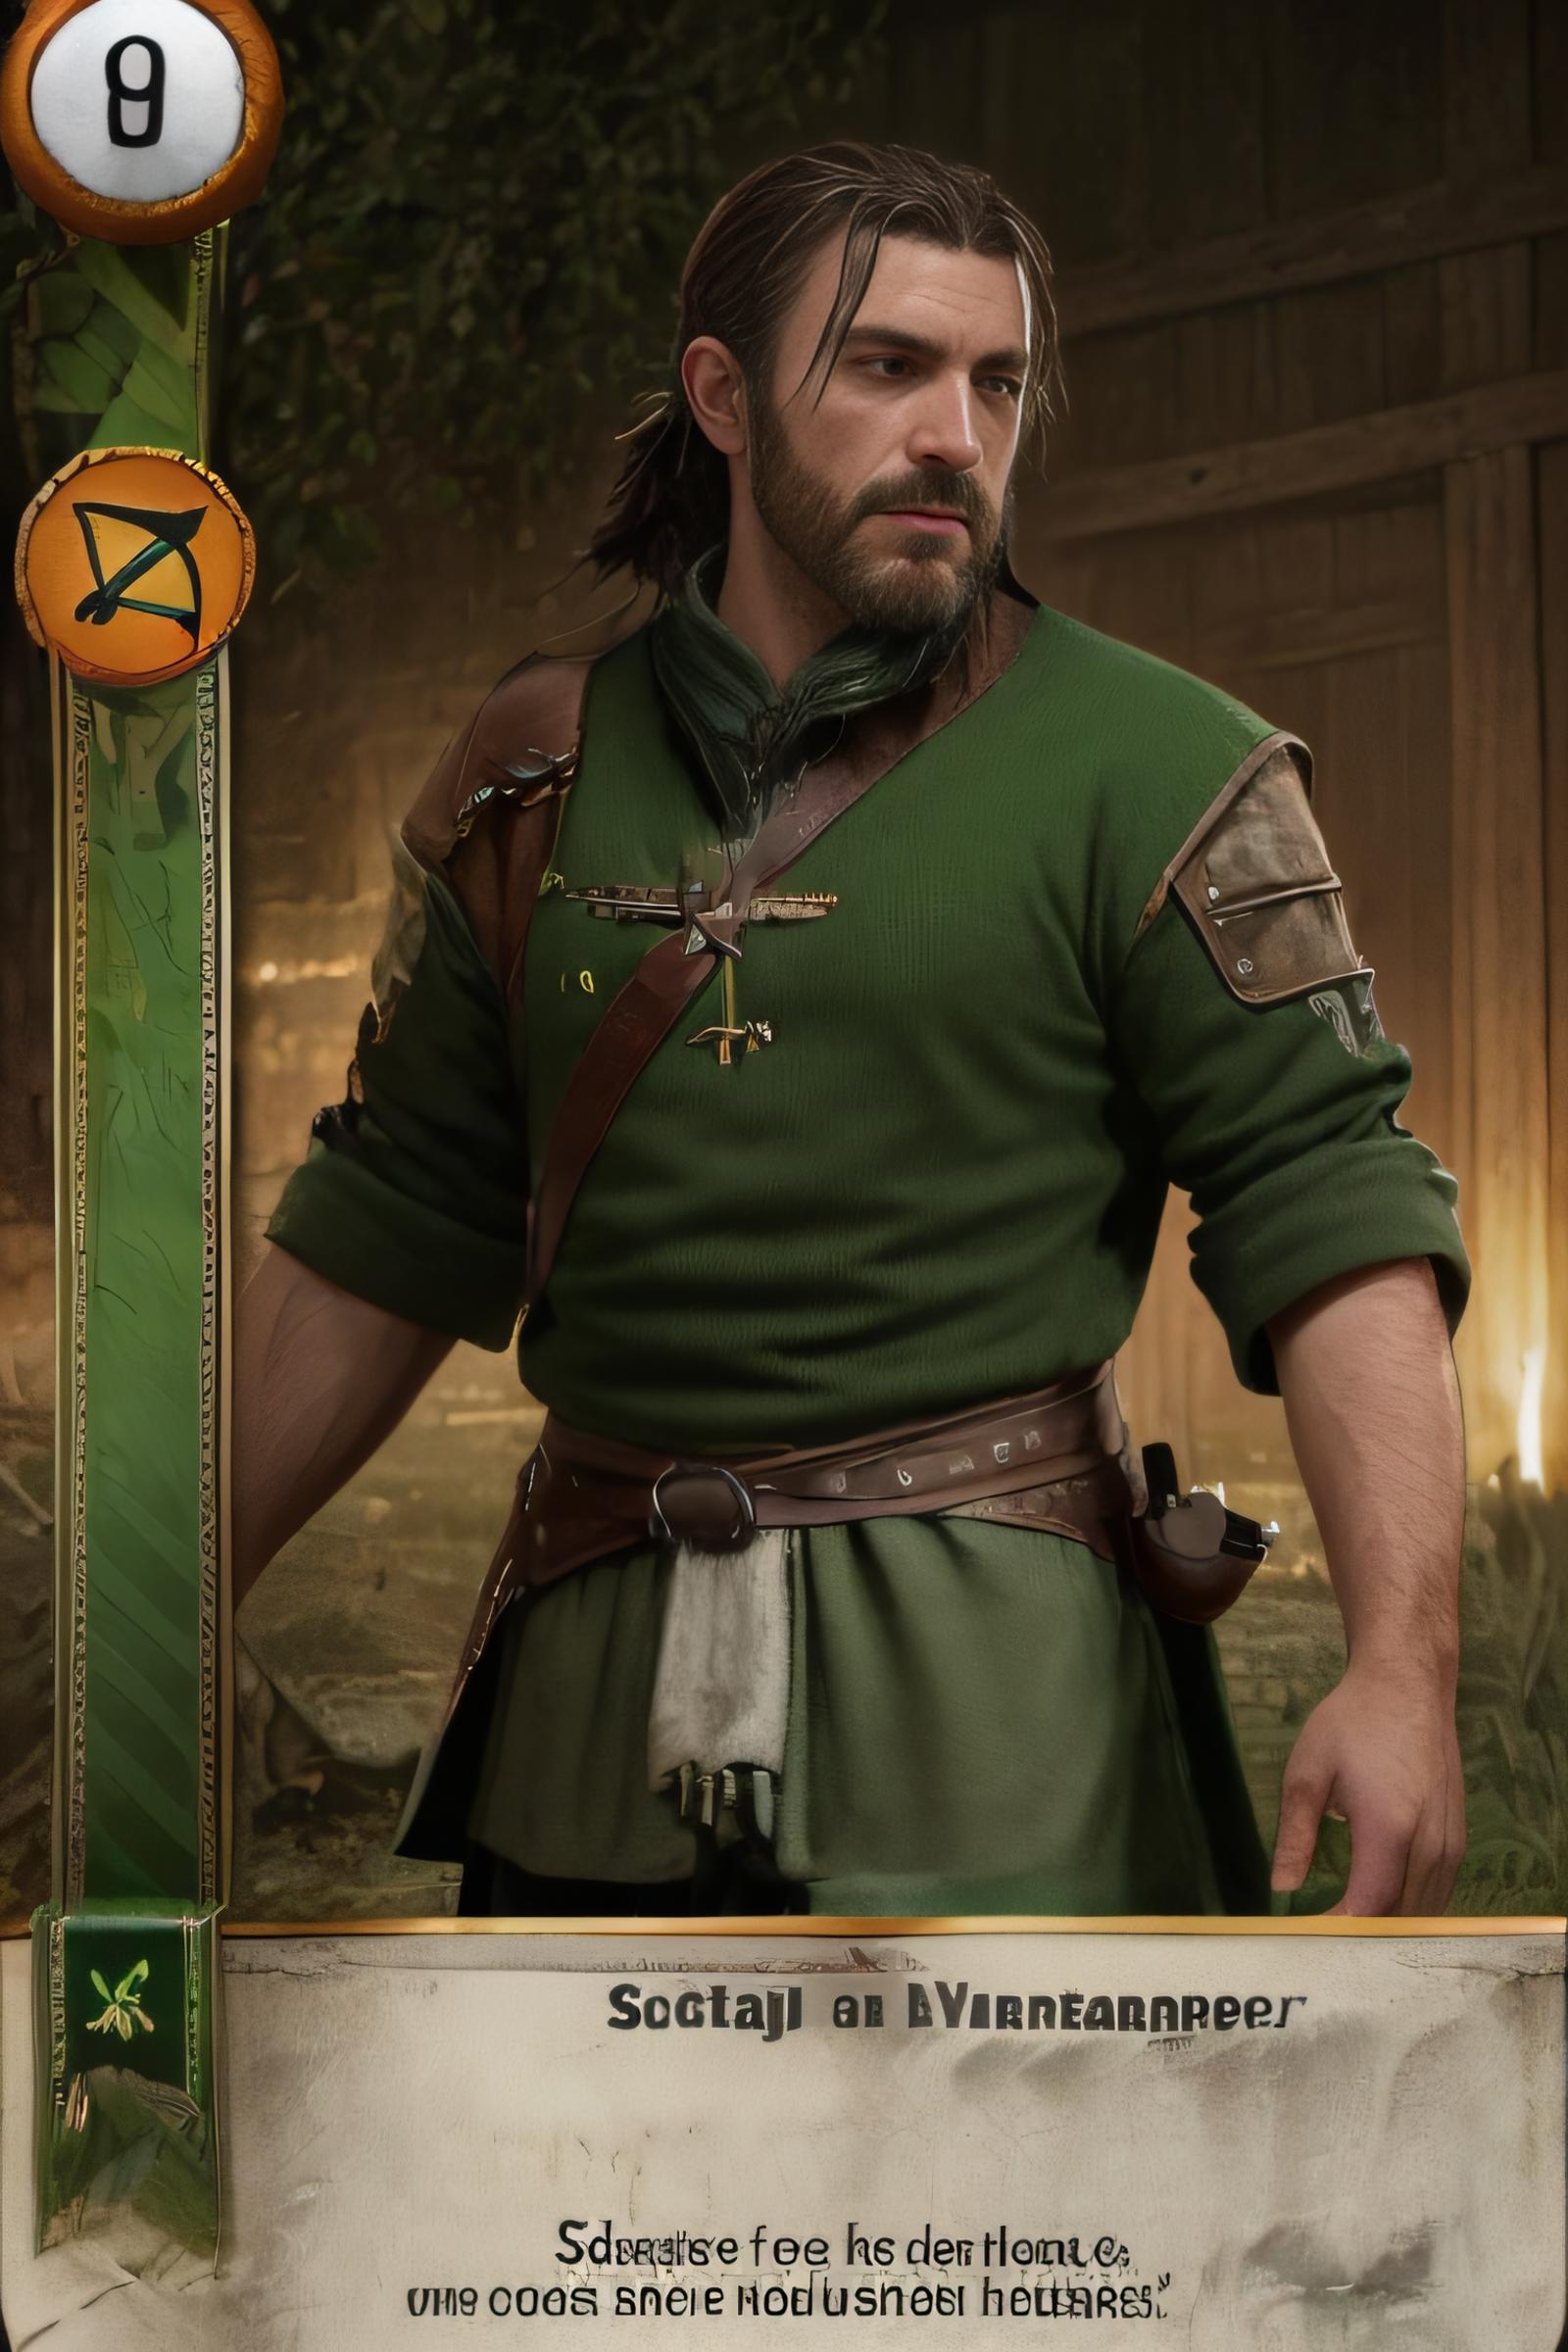 Gwent Cards (Witcher 3 style) image by TalesfromOurDigitalLives